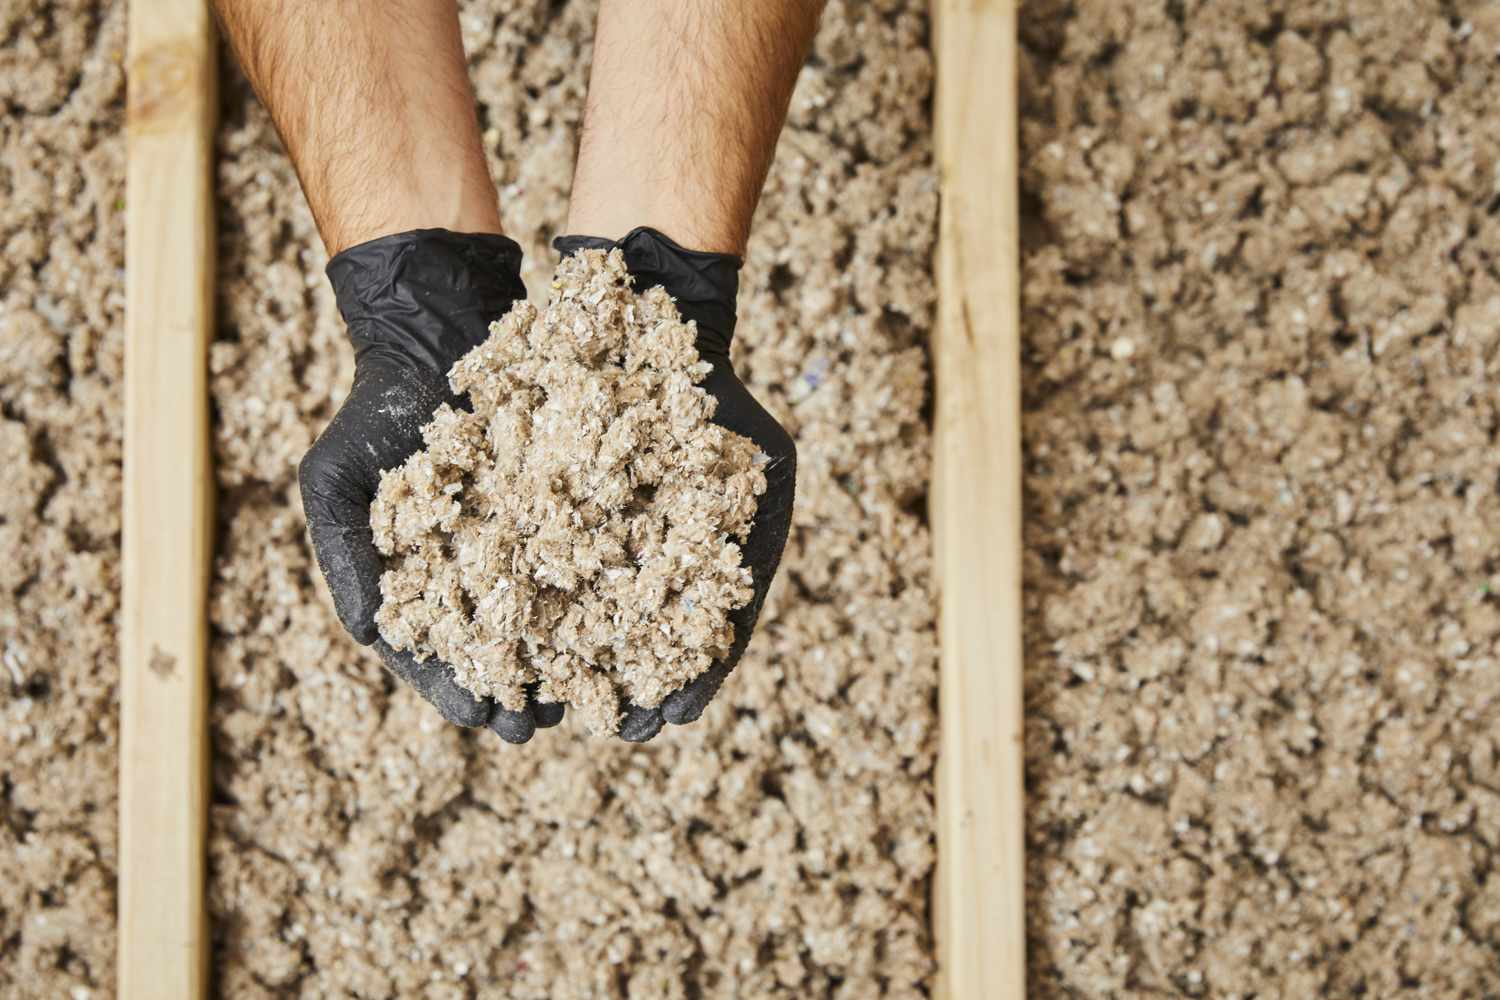 Hands holding a pile of loose-fill cellulose insulation